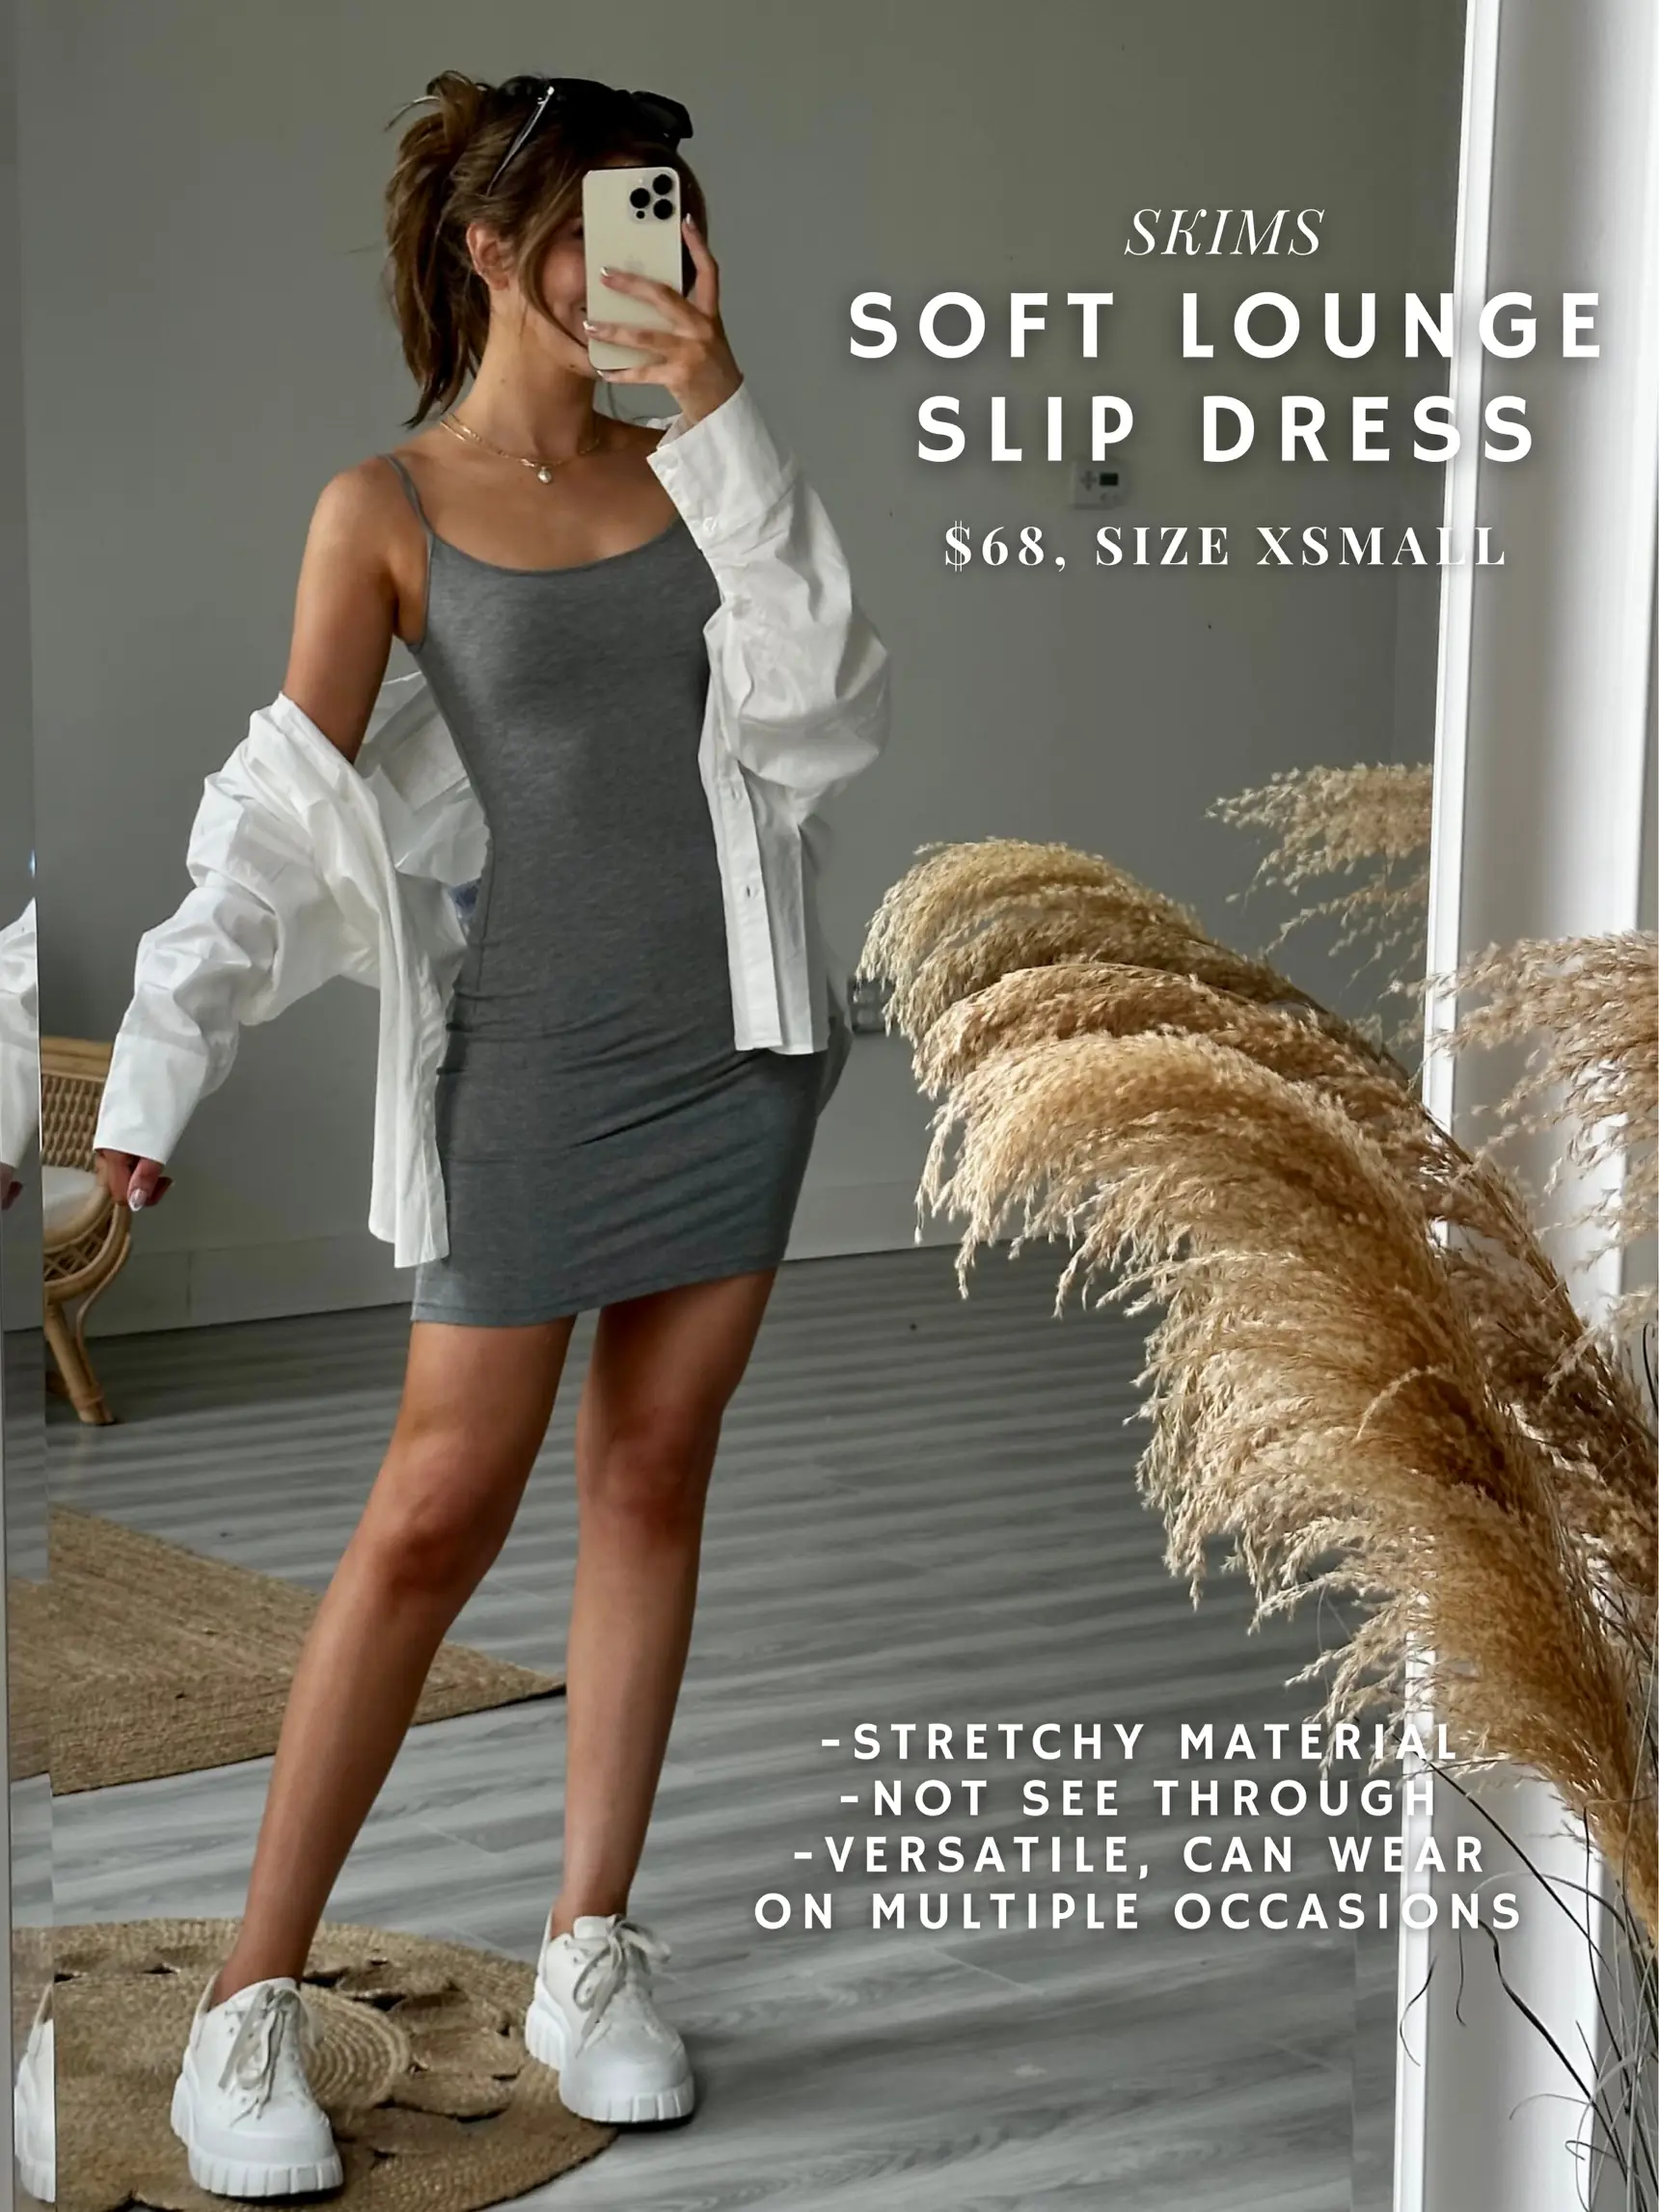 Here's a quick video of me wearing SKIMS Soft Lounge Long Sleeve Dress